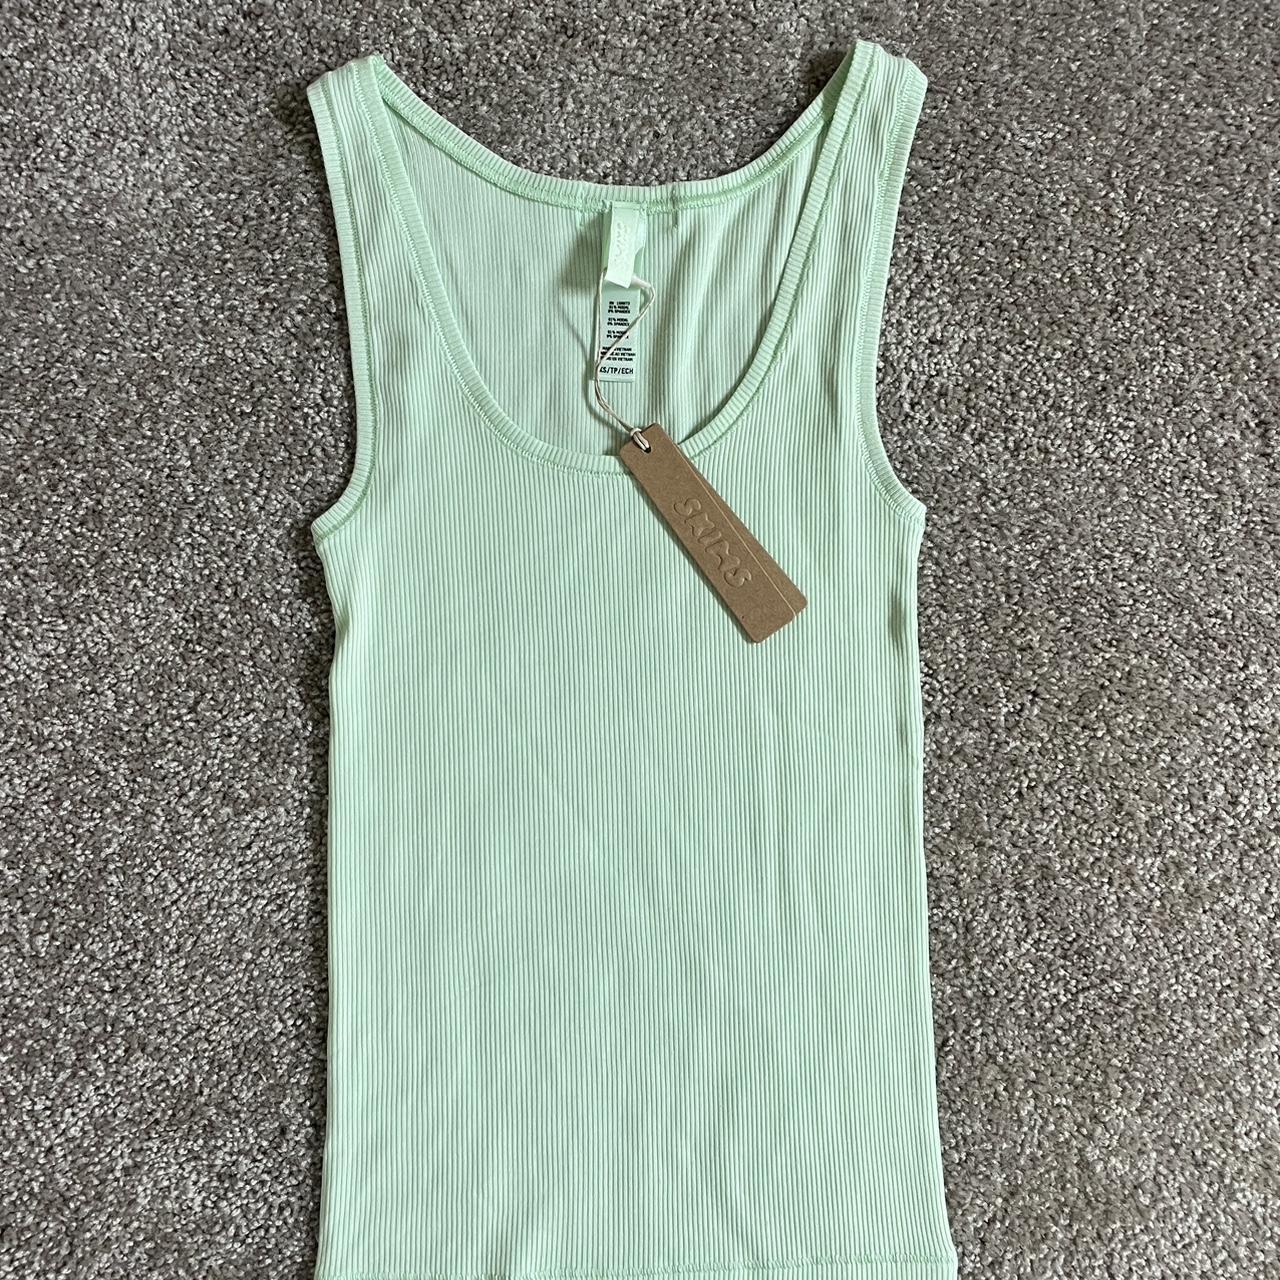 SKIMS Women's Army Green Soft Lounge Ribbed Casual Tank Top Size 4XL